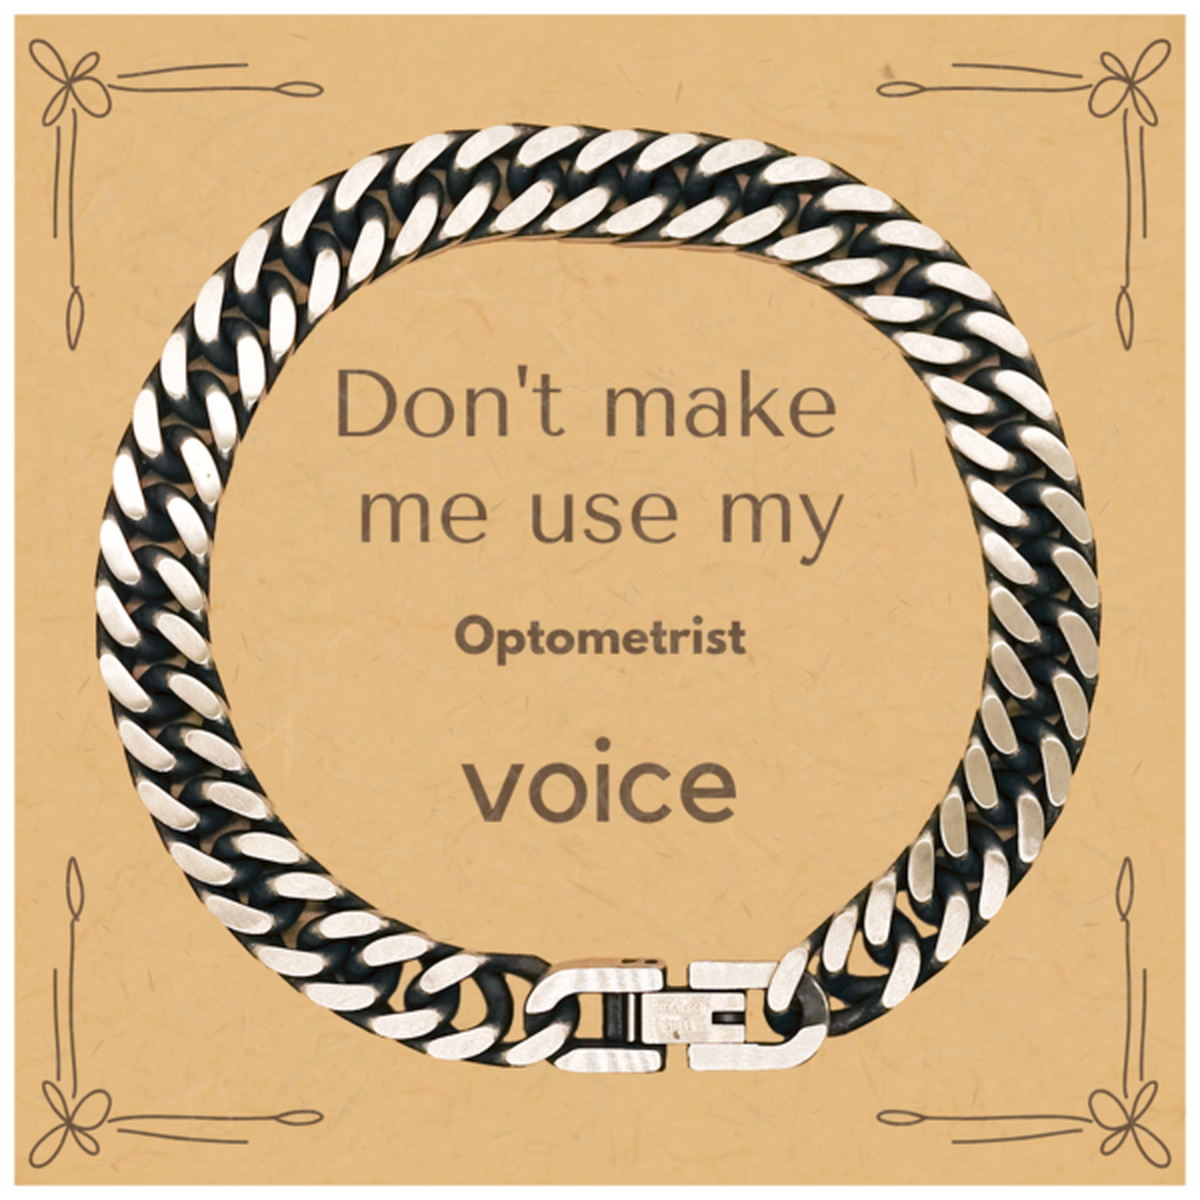 Don't make me use my Optometrist voice, Sarcasm Optometrist Card Gifts, Christmas Optometrist Cuban Link Chain Bracelet Birthday Unique Gifts For Optometrist Coworkers, Men, Women, Colleague, Friends